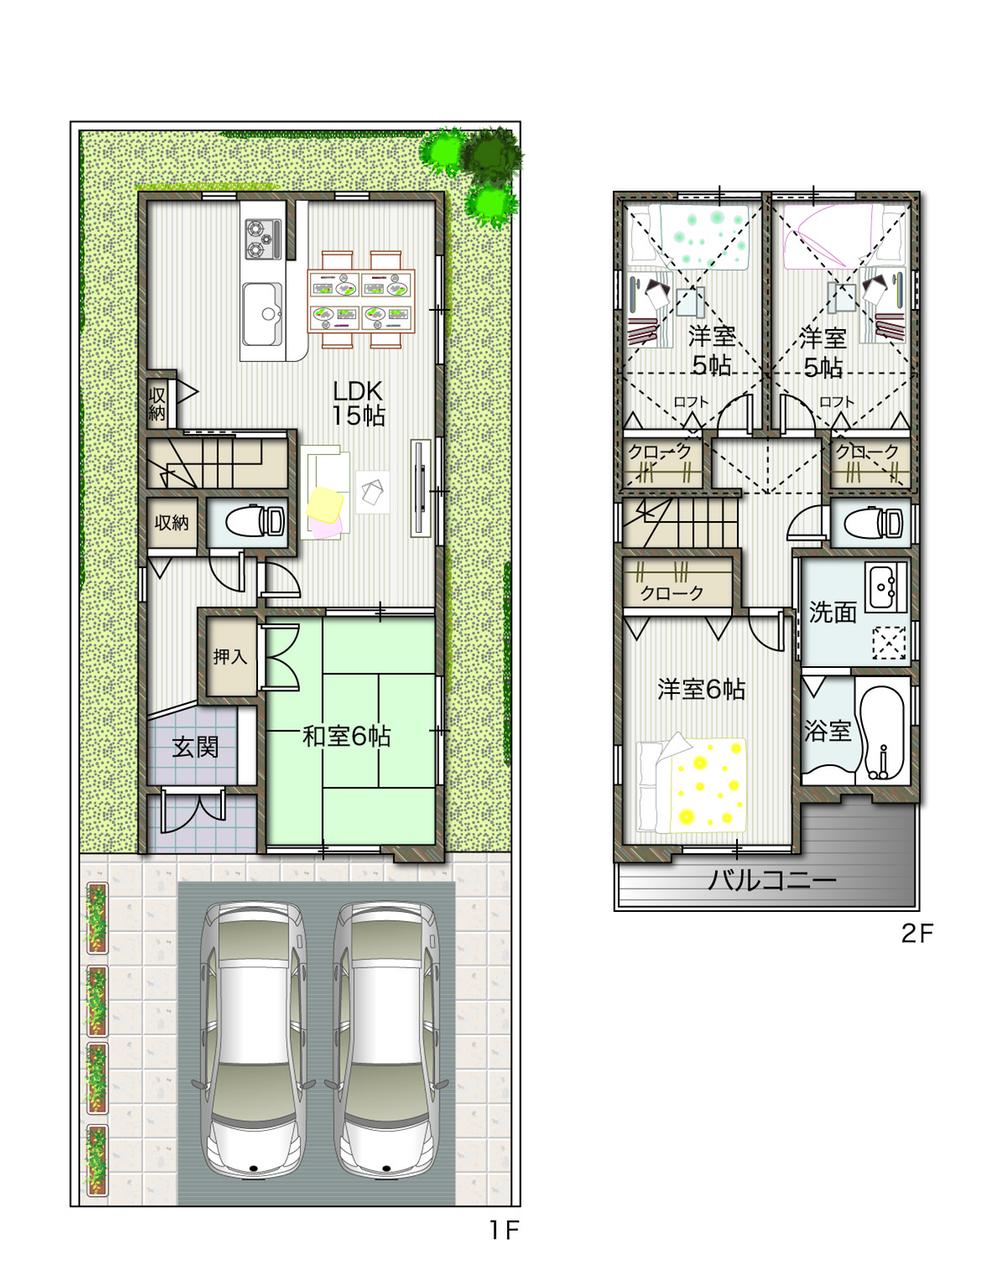 Floor plan. 33,800,000 yen, 4LDK, Land area 85.65 sq m , Per building area 85.86 sq m reference drawings, Floor plan can be changed